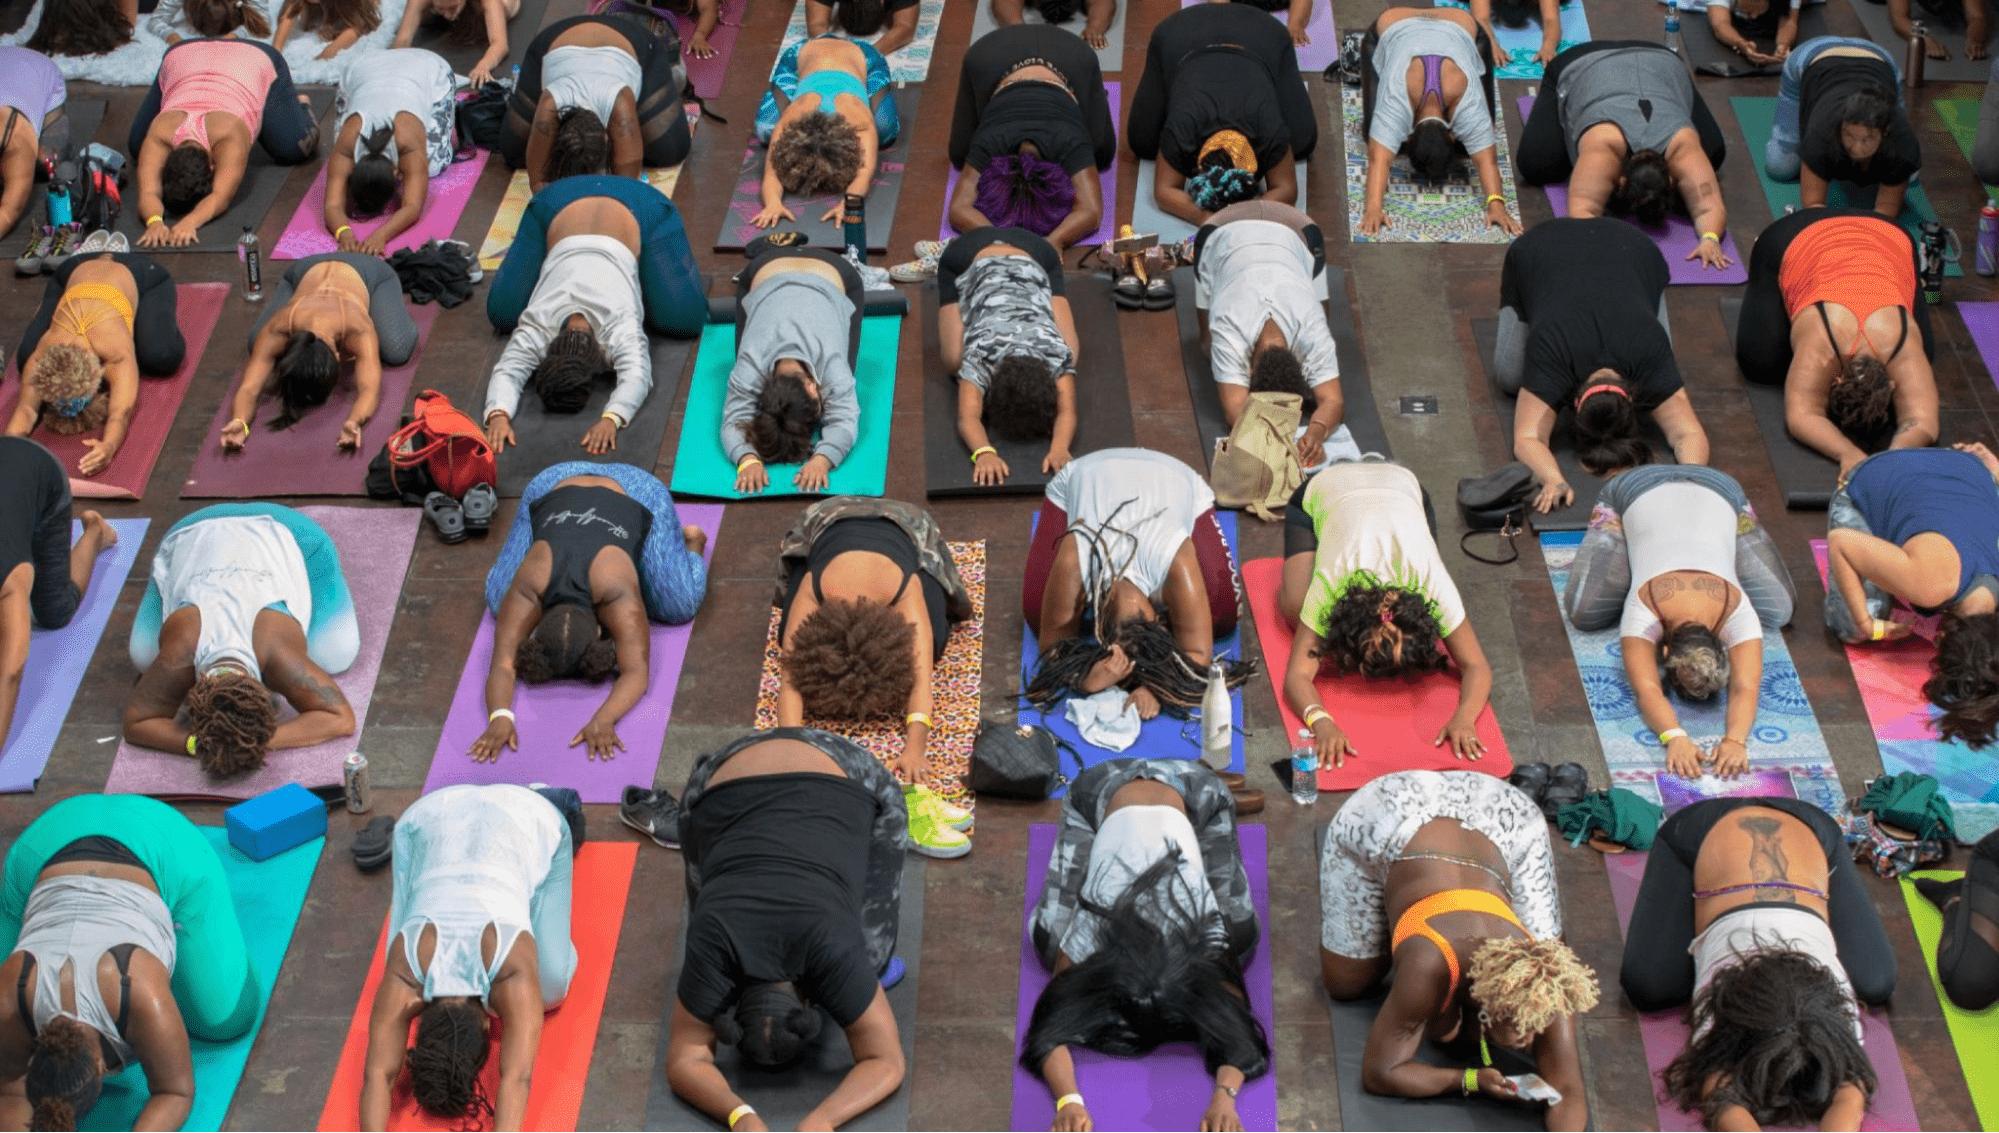 A group of yoga participants stretch on mats